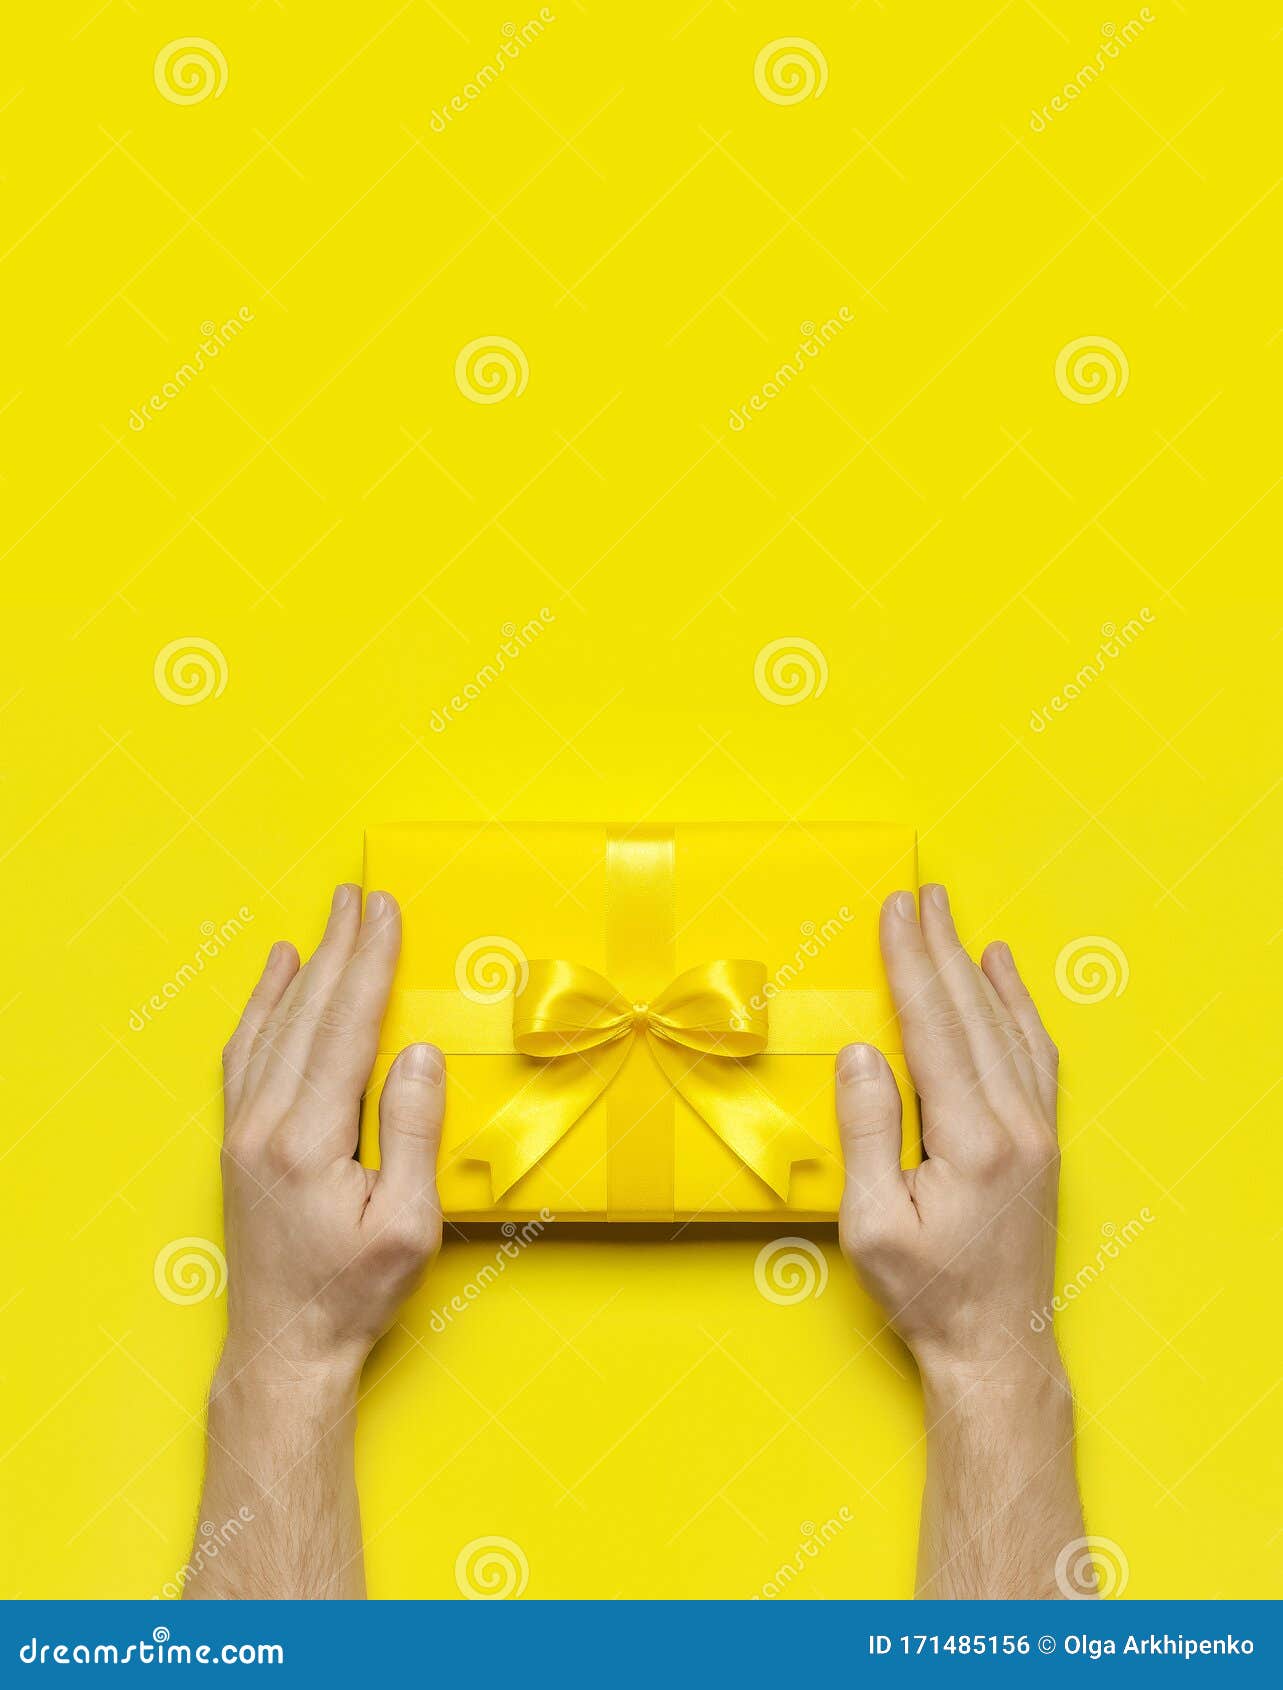 Male Hands Holding Bright Yellow Gift Present Box With